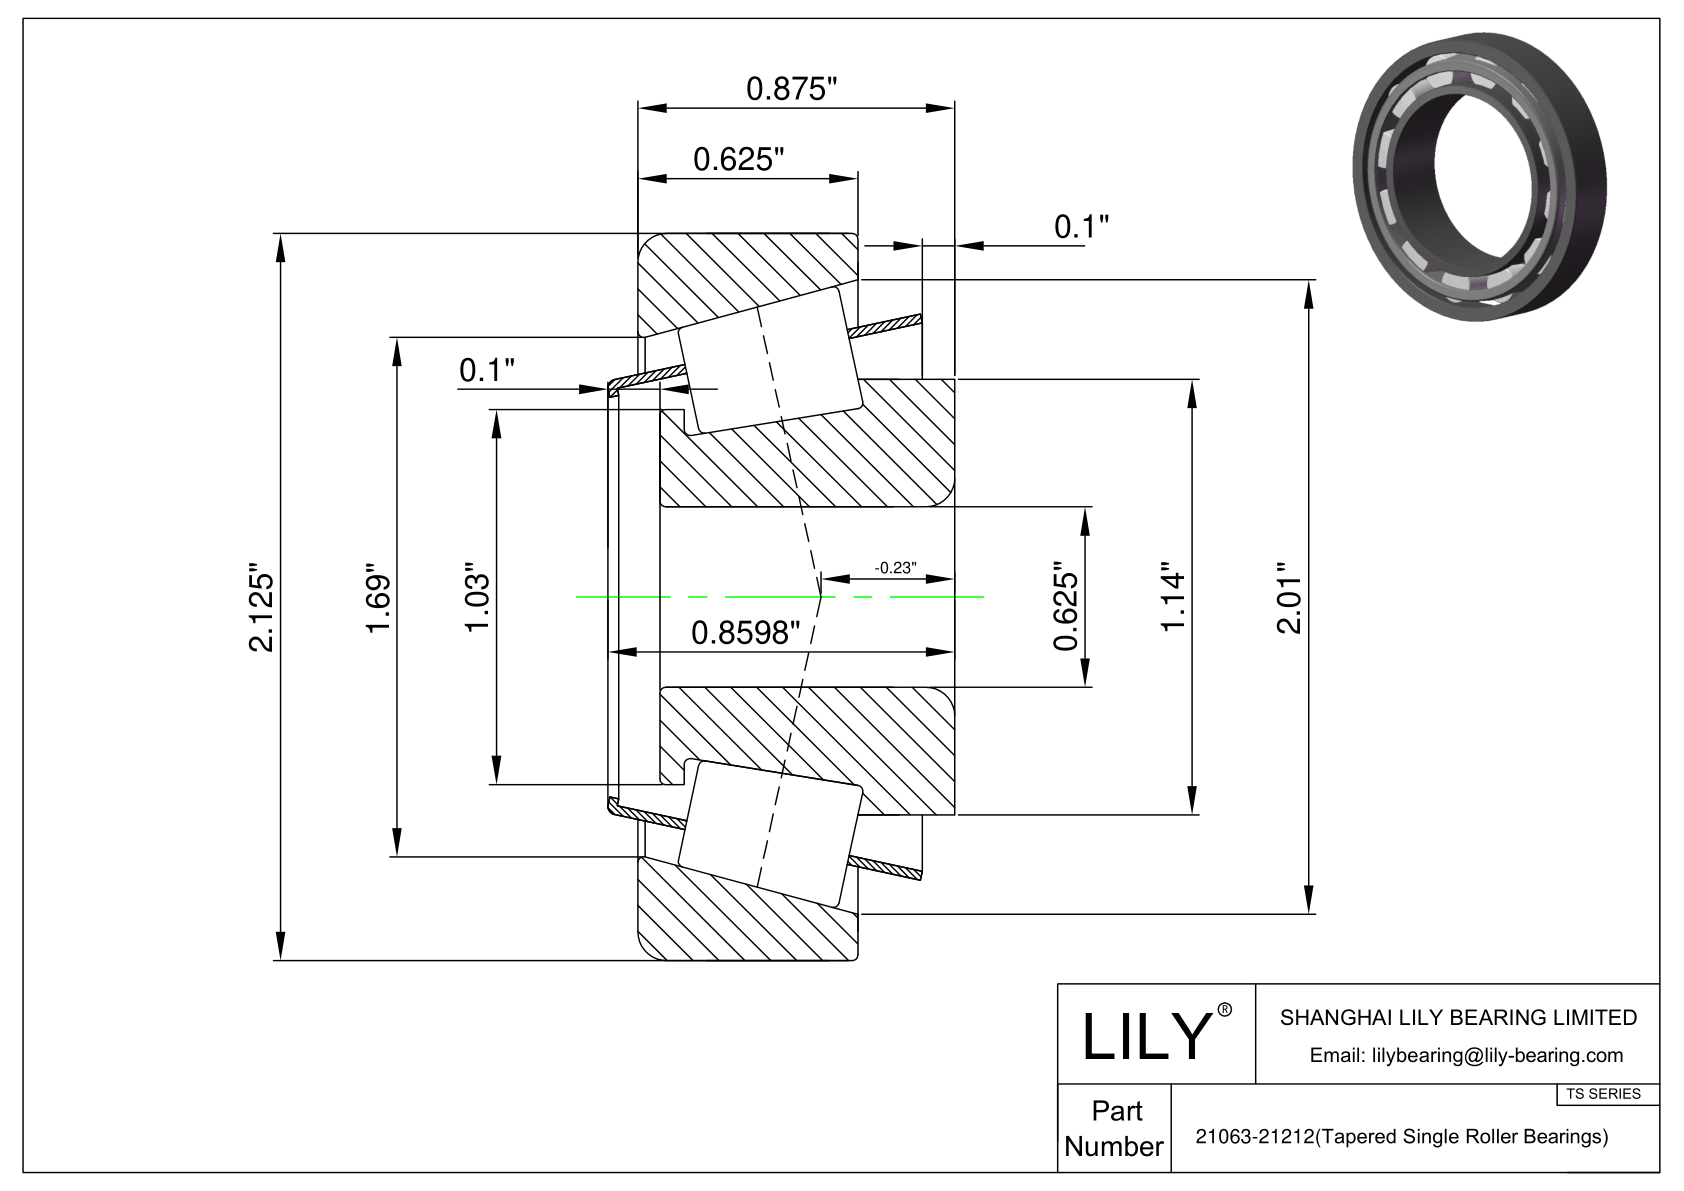 21063-21212 TS (Tapered Single Roller Bearings) (Imperial) cad drawing